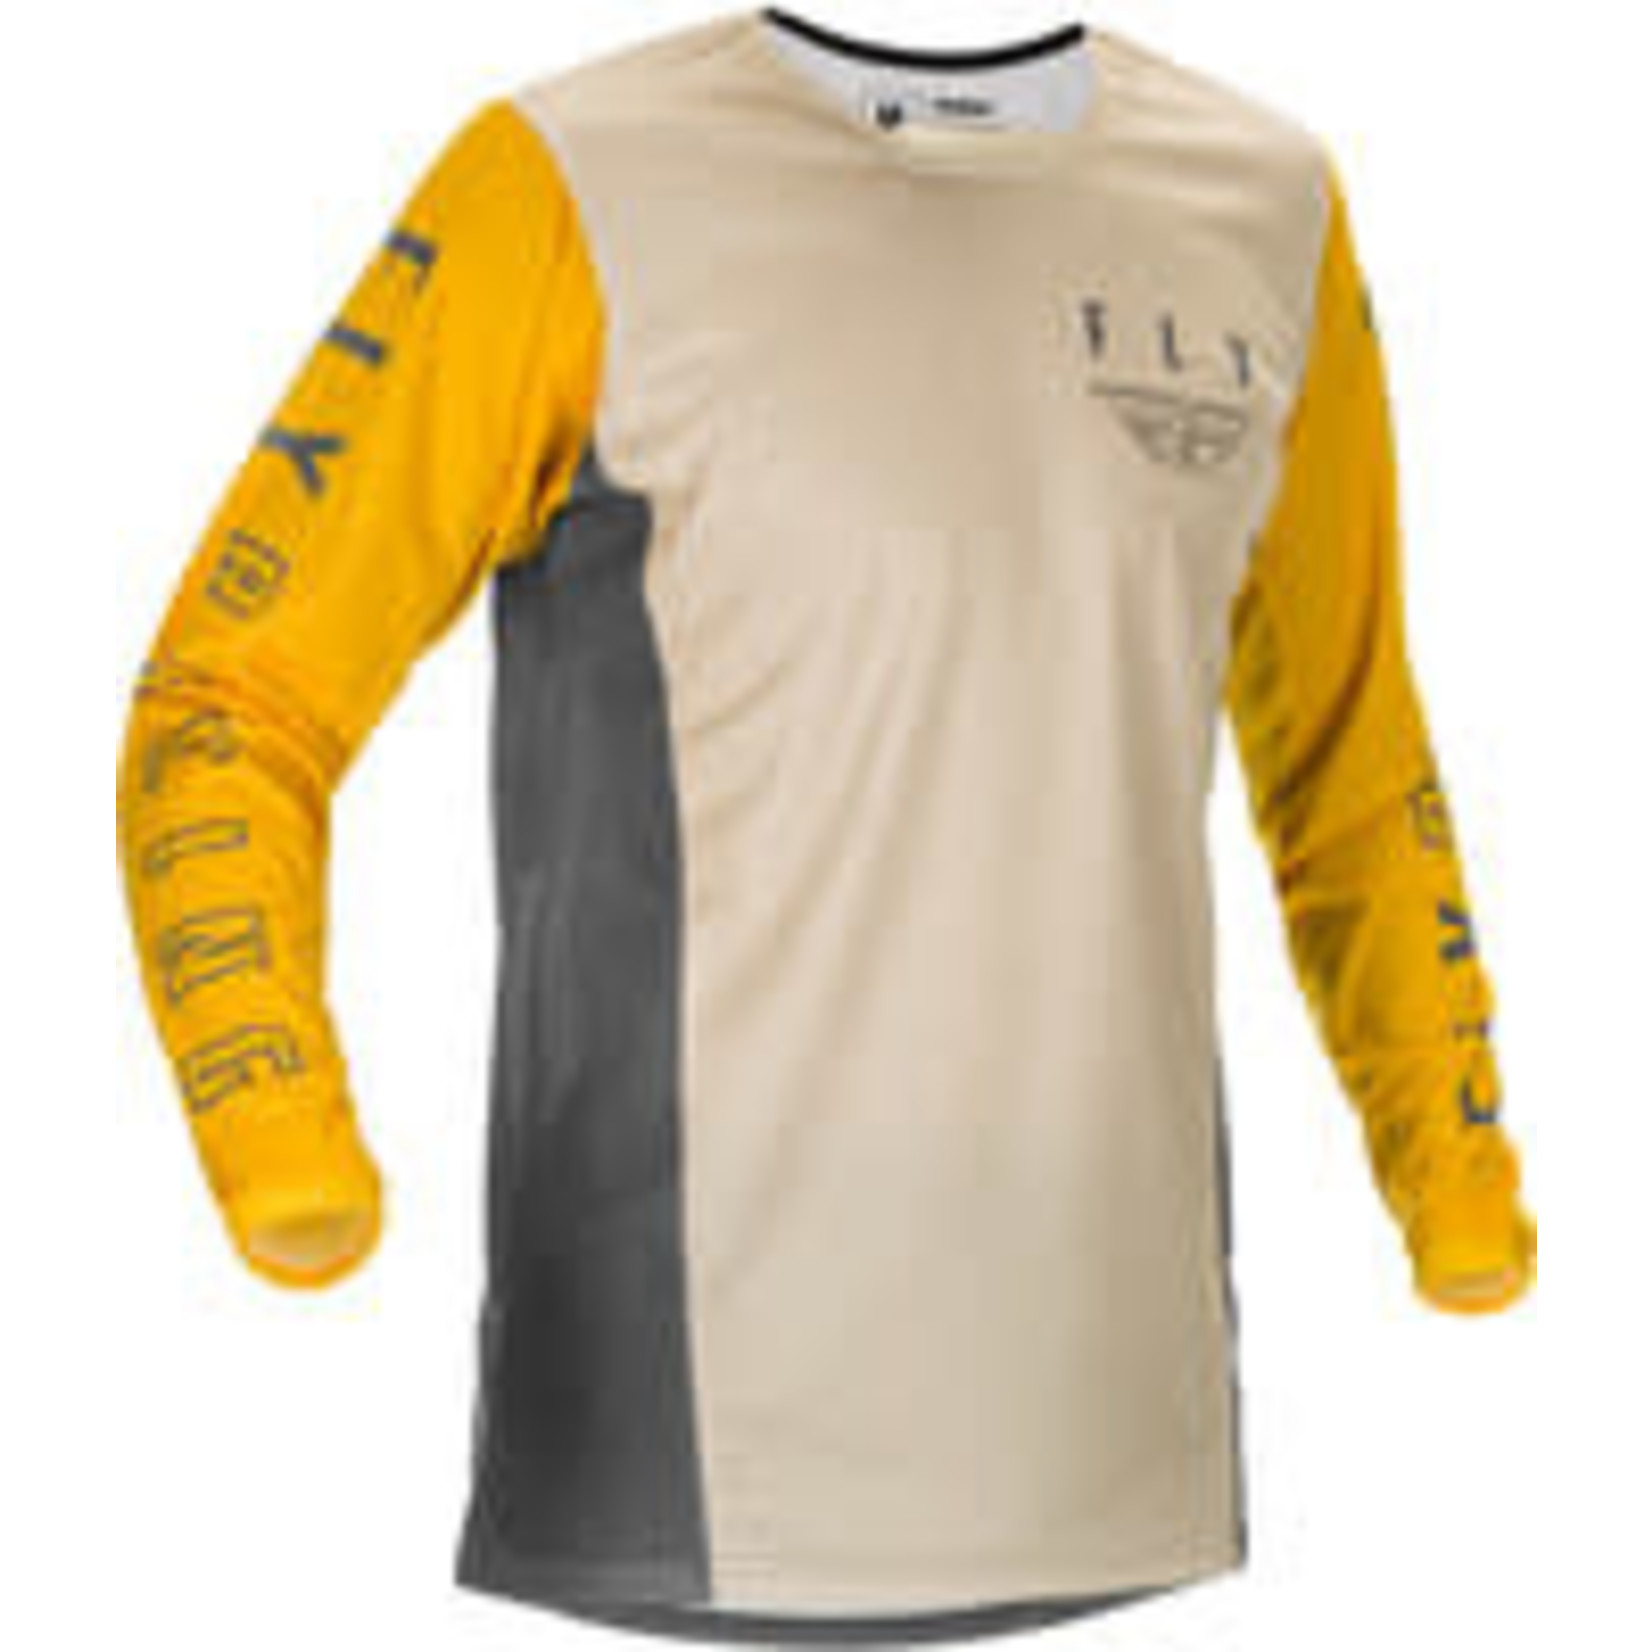 FLY RACING KINETIC K121 JERSEY MUSTARD/STONE/GREY YOUTH